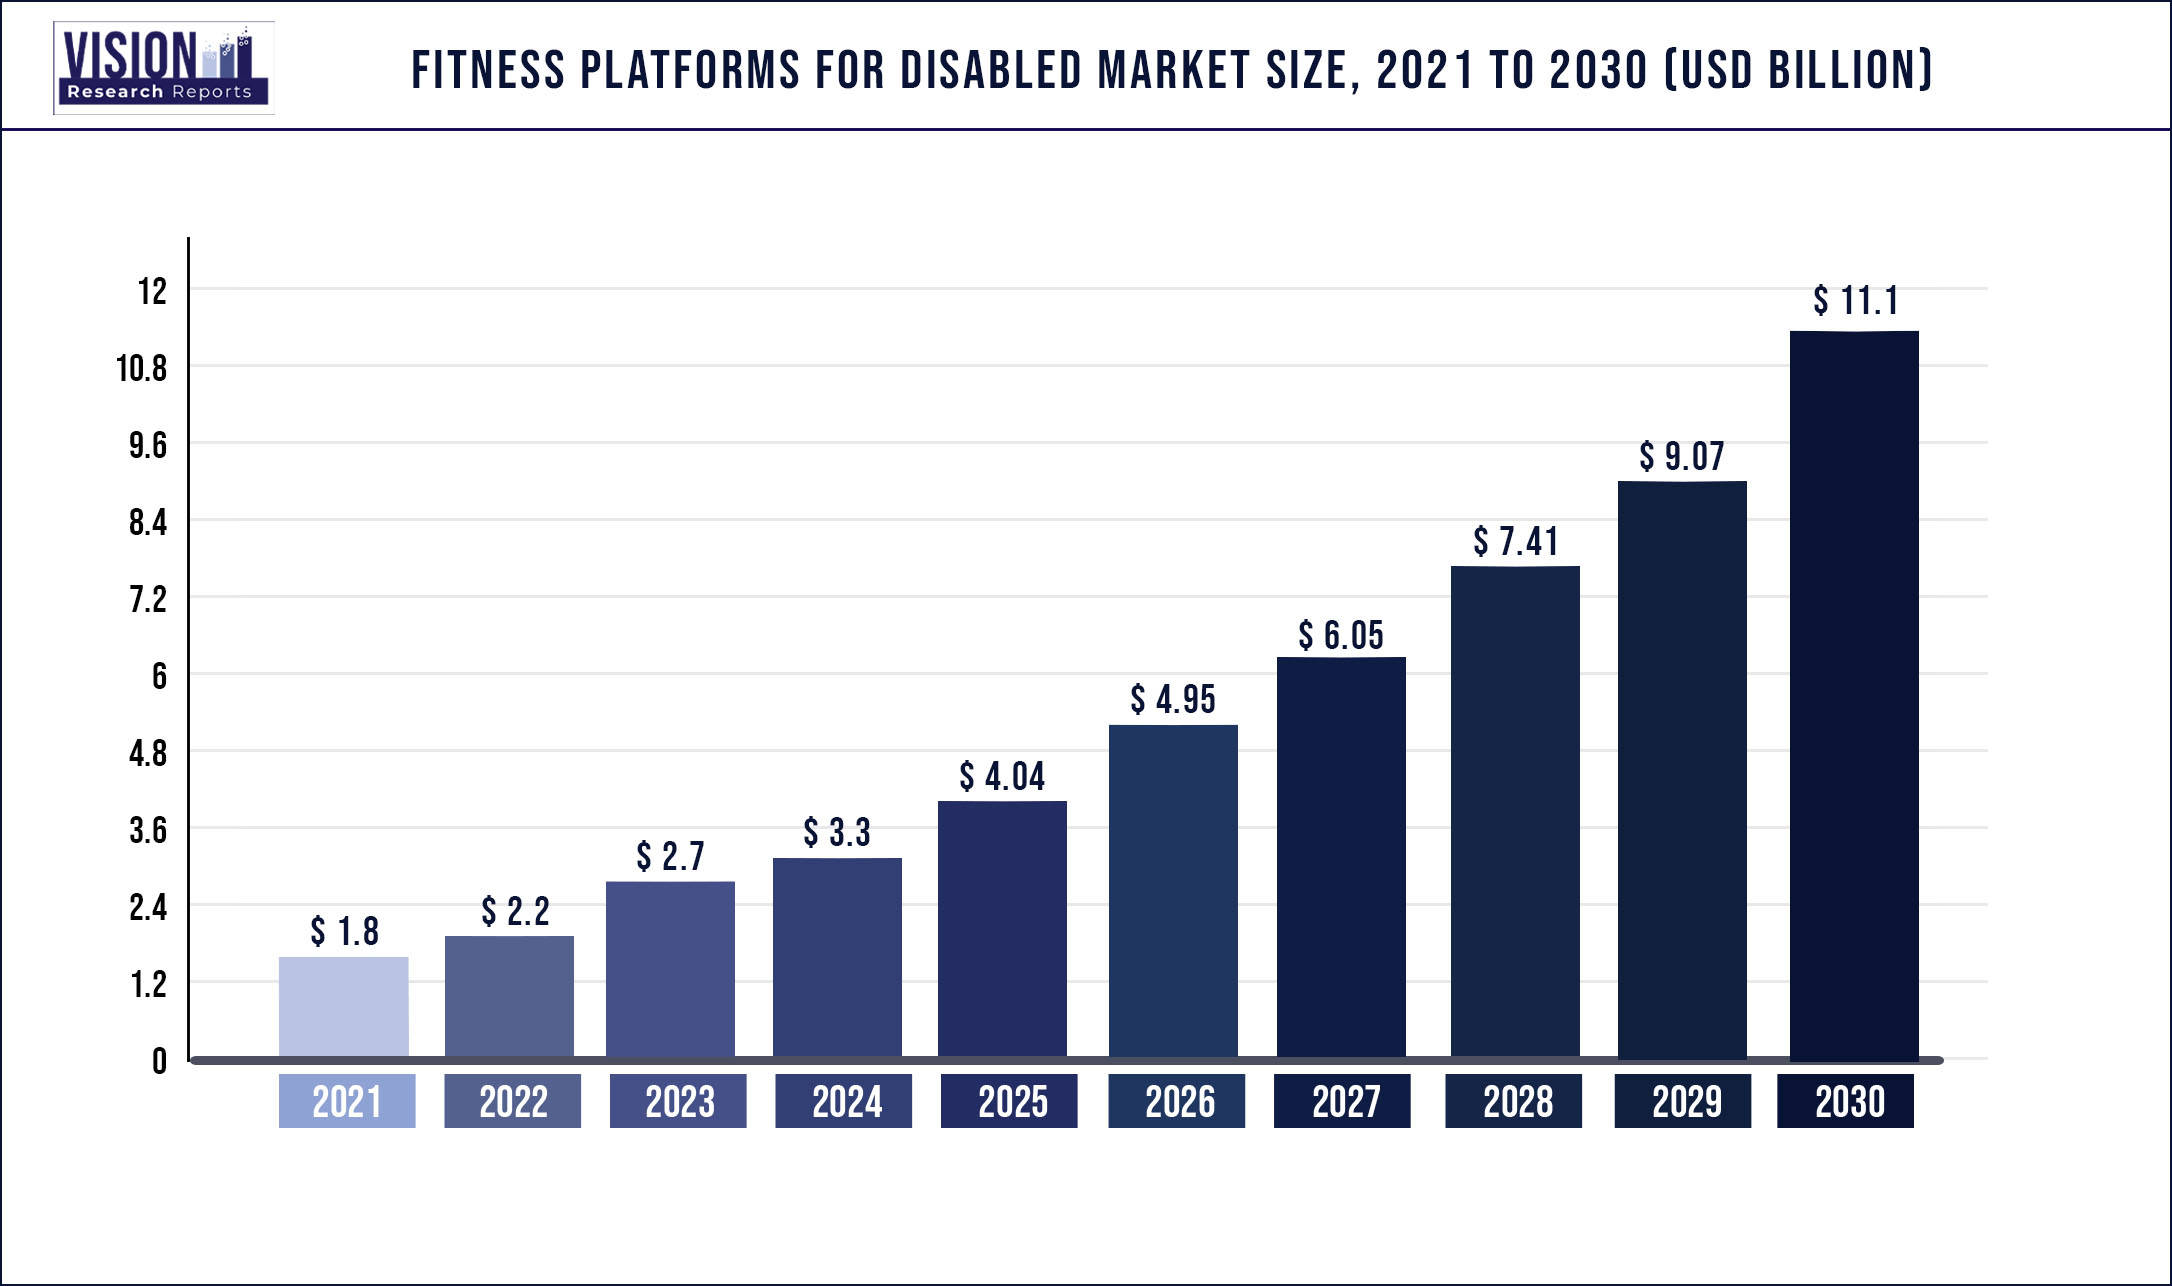 Fitness Platforms For Disabled Market Size 2021 to 2030